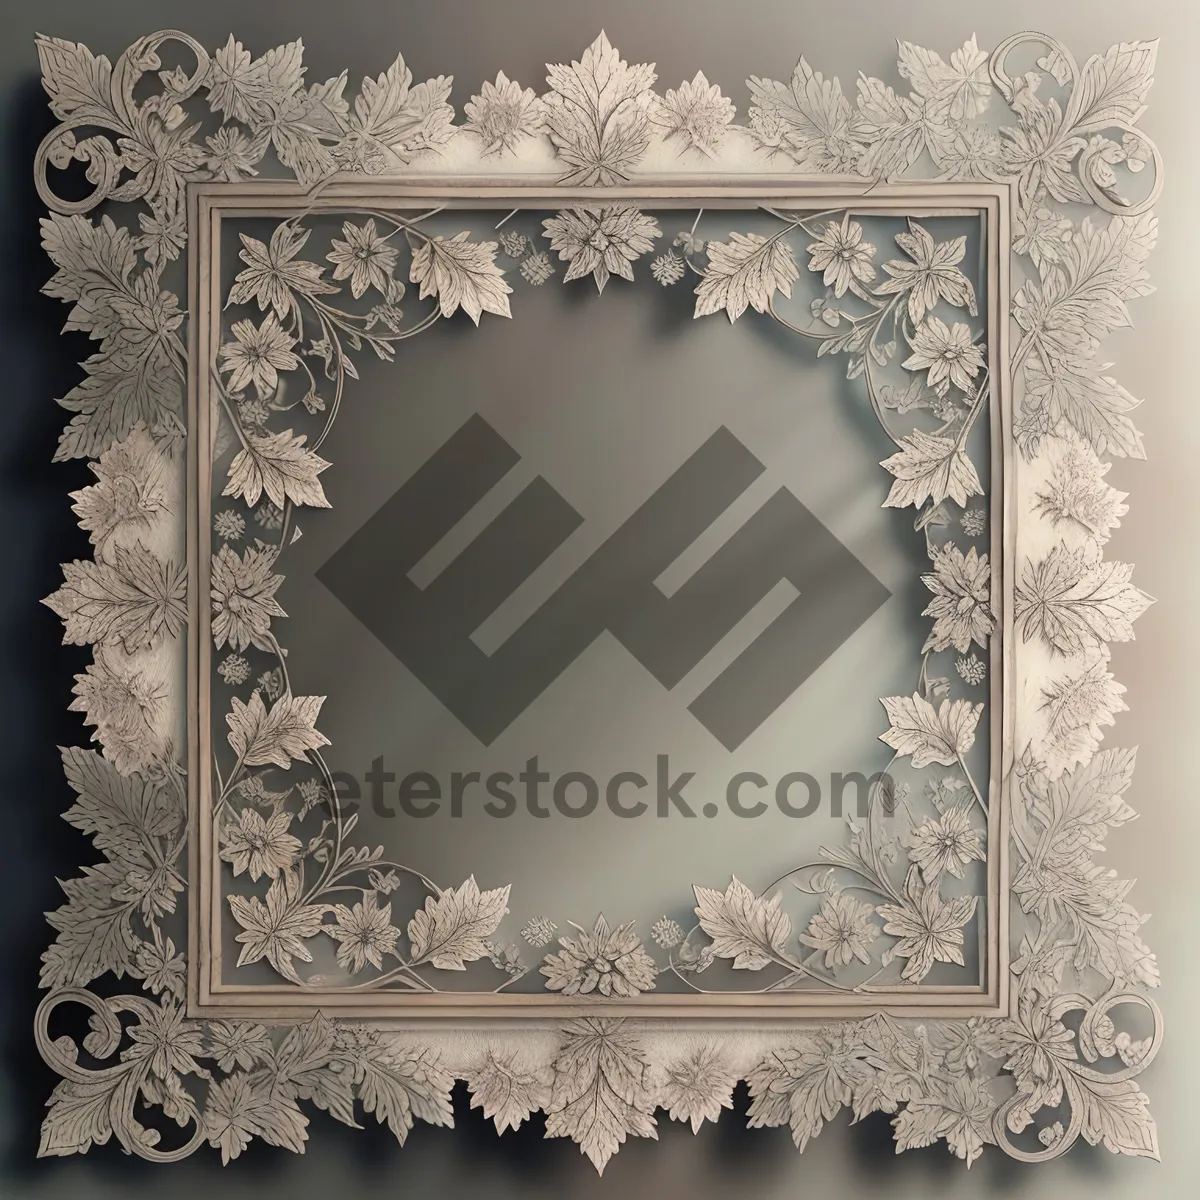 Picture of Ornate Vintage Border with Golden Lace Design